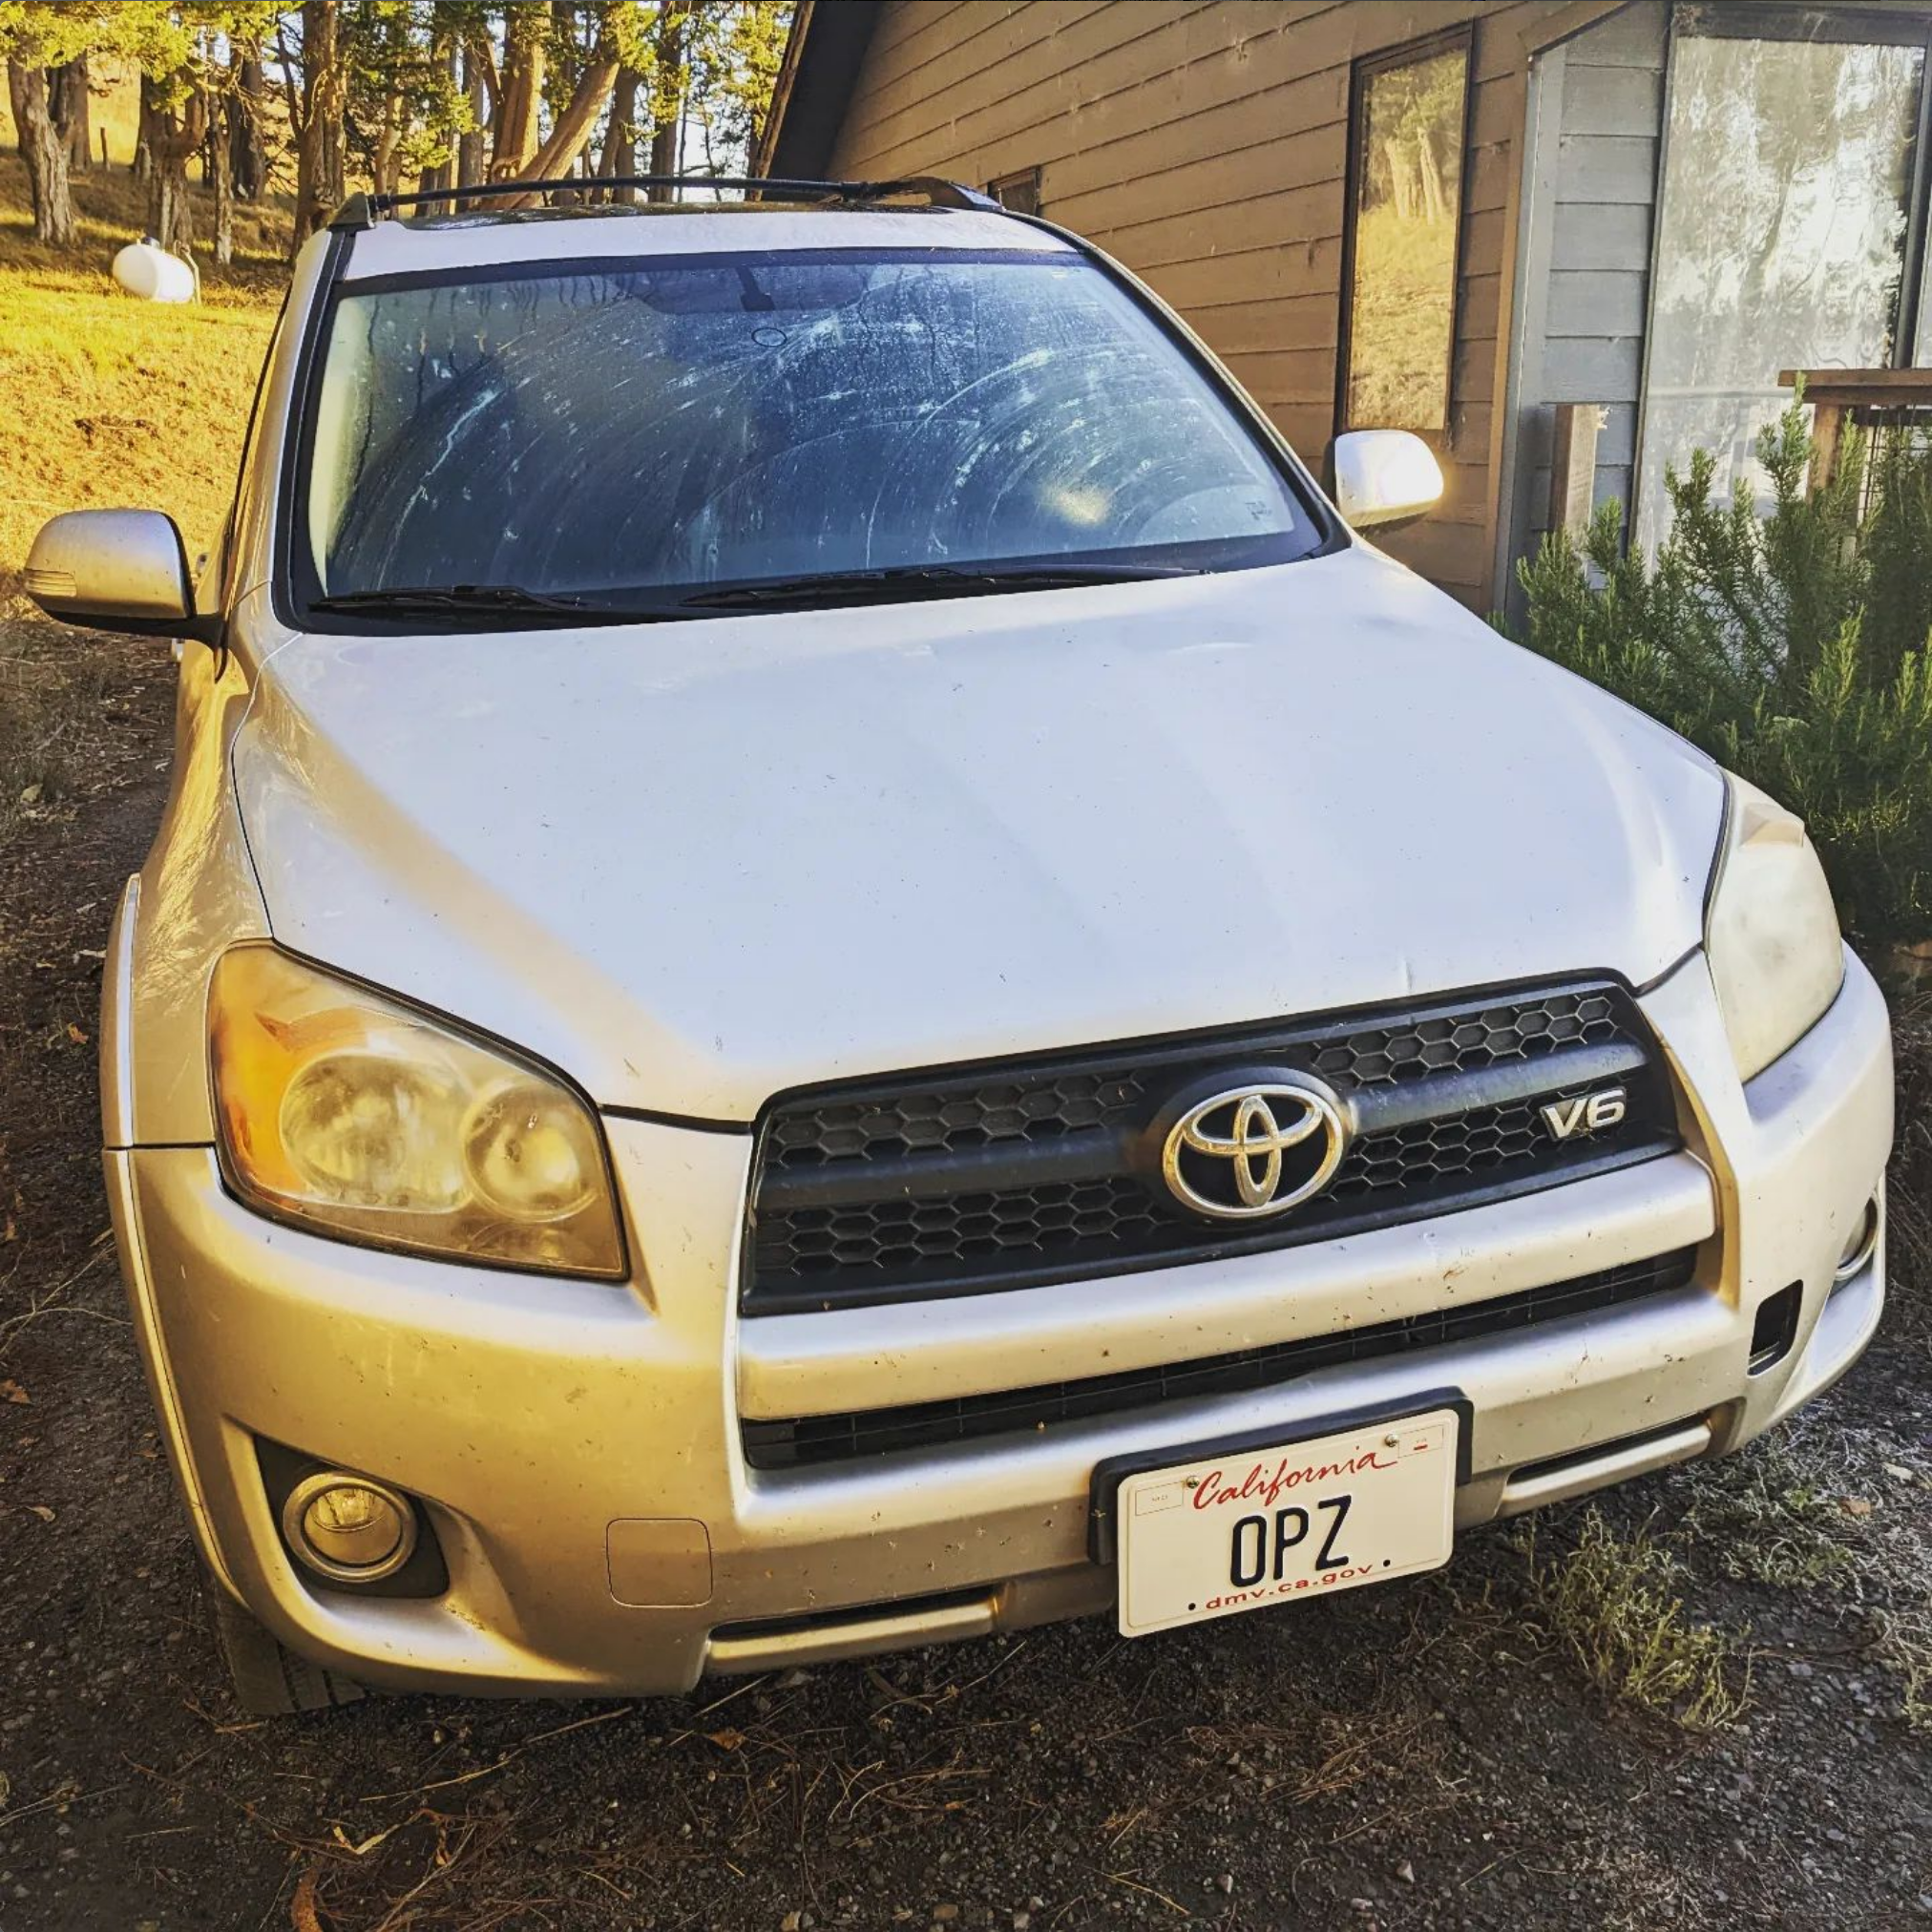 Photo of a silver Toyota RAV4 with the license plate "OPZ"